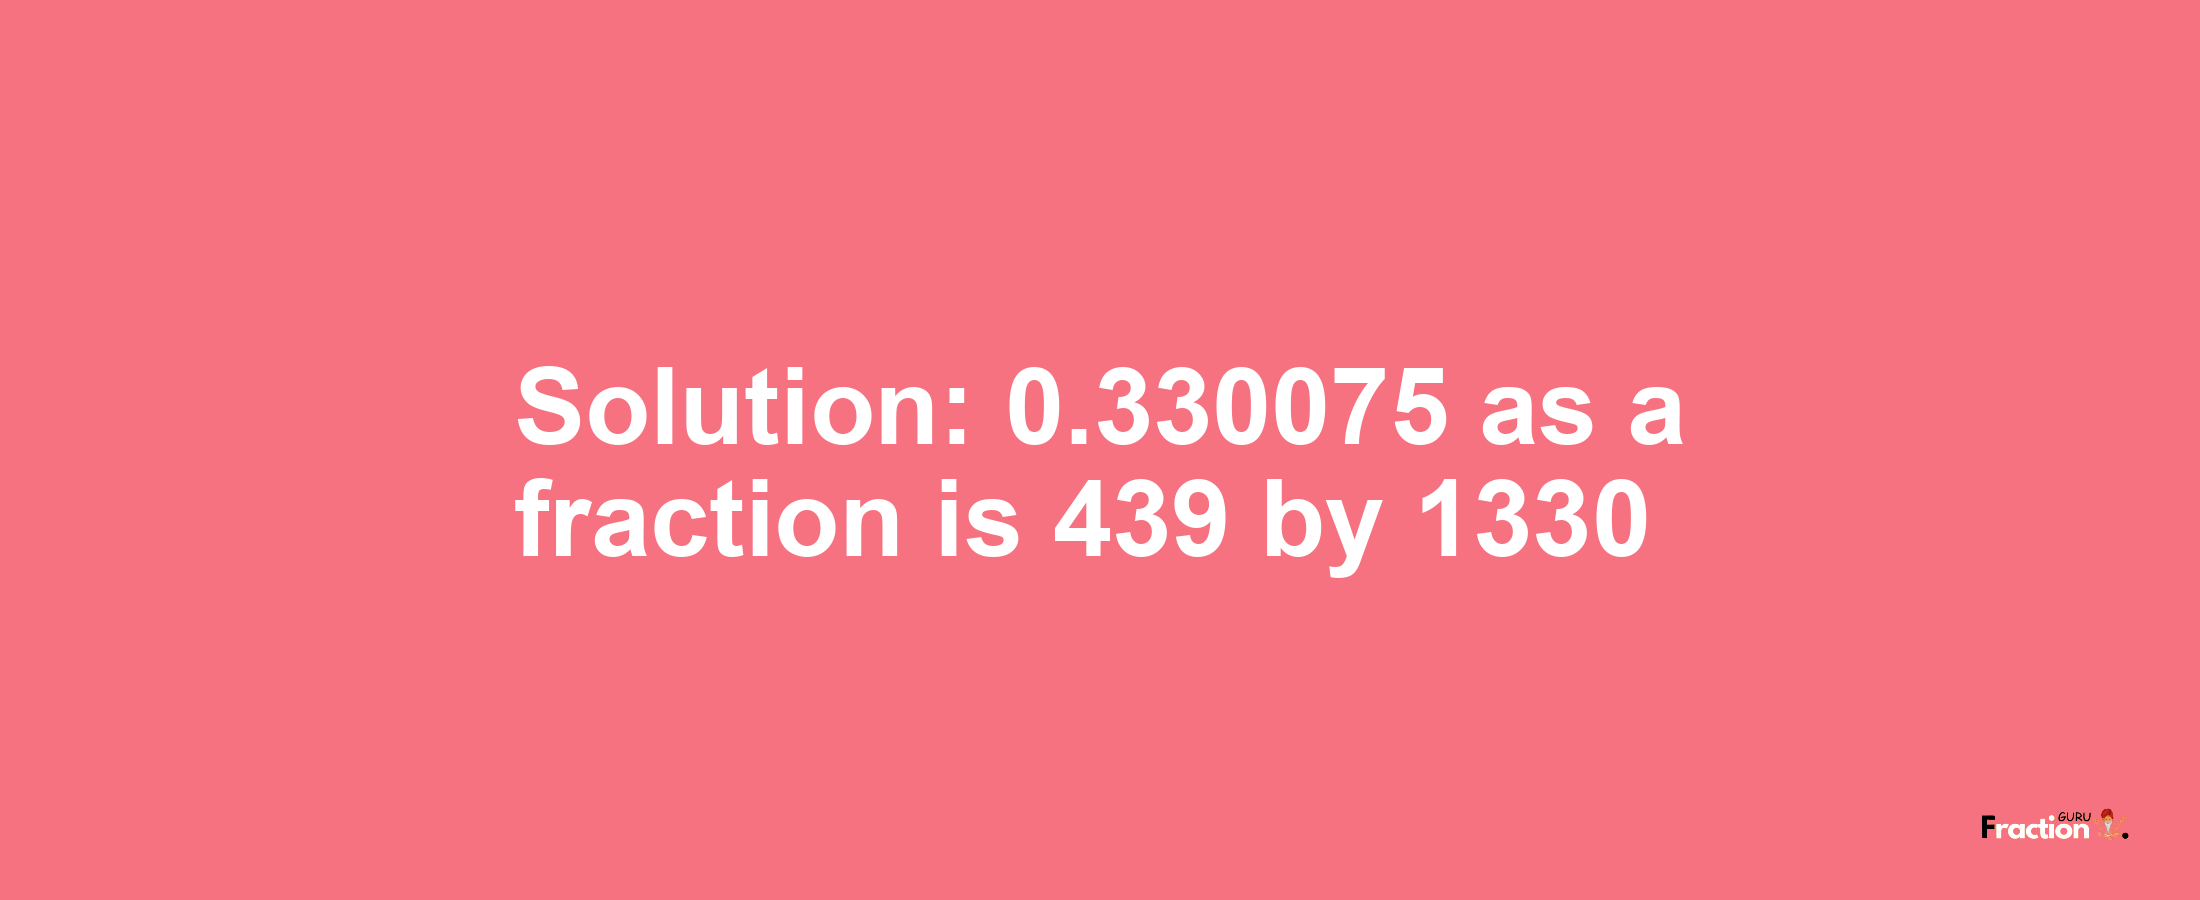 Solution:0.330075 as a fraction is 439/1330